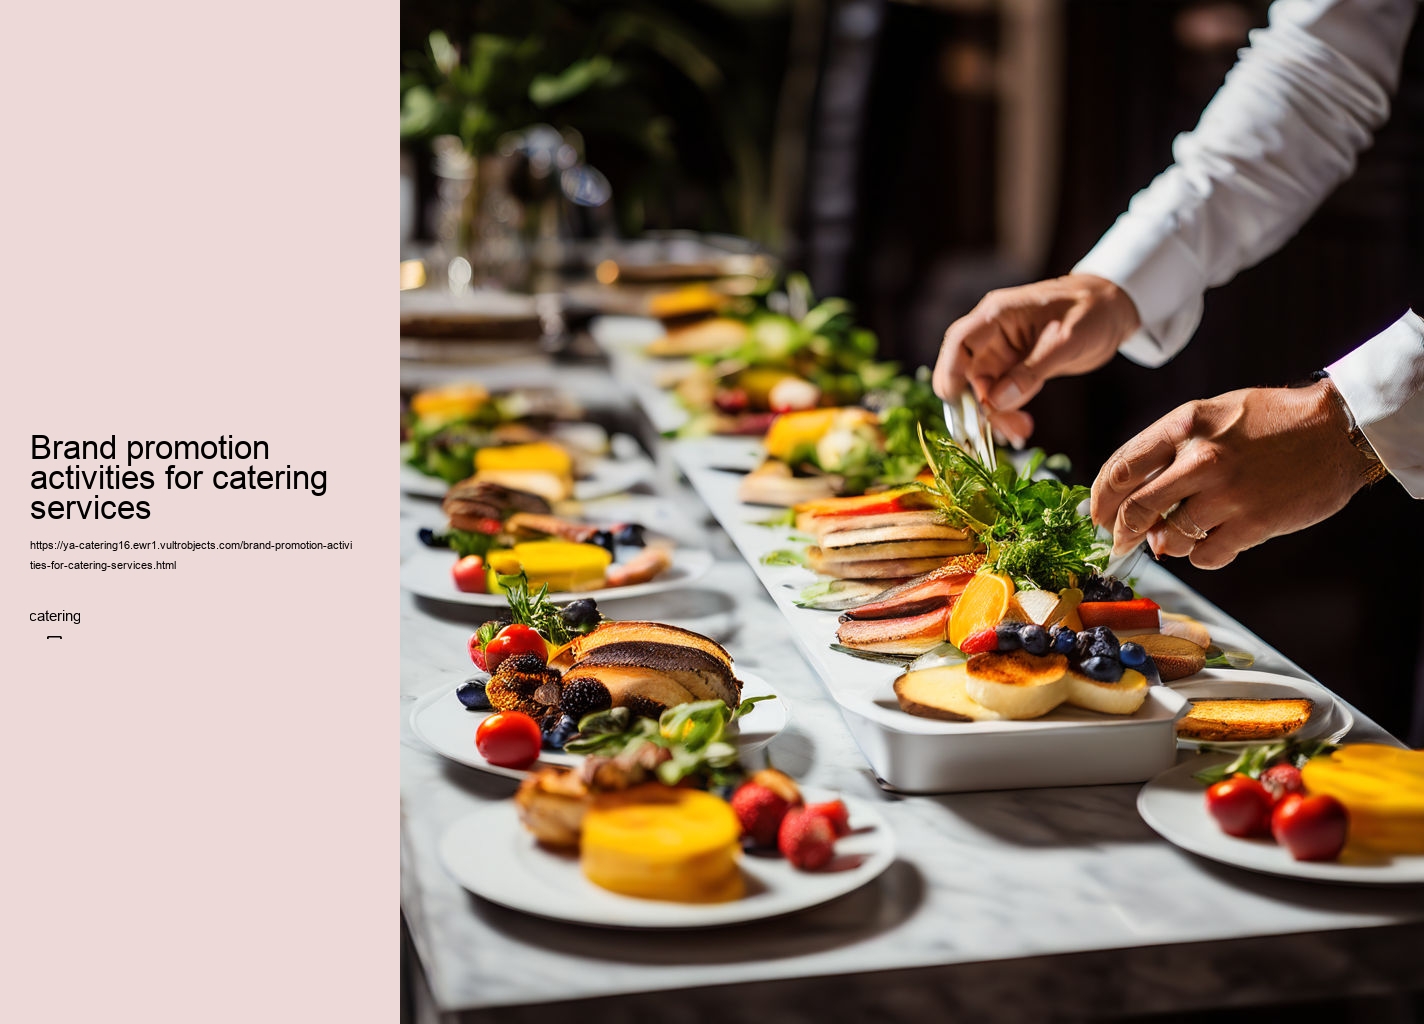 Brand promotion activities for catering services